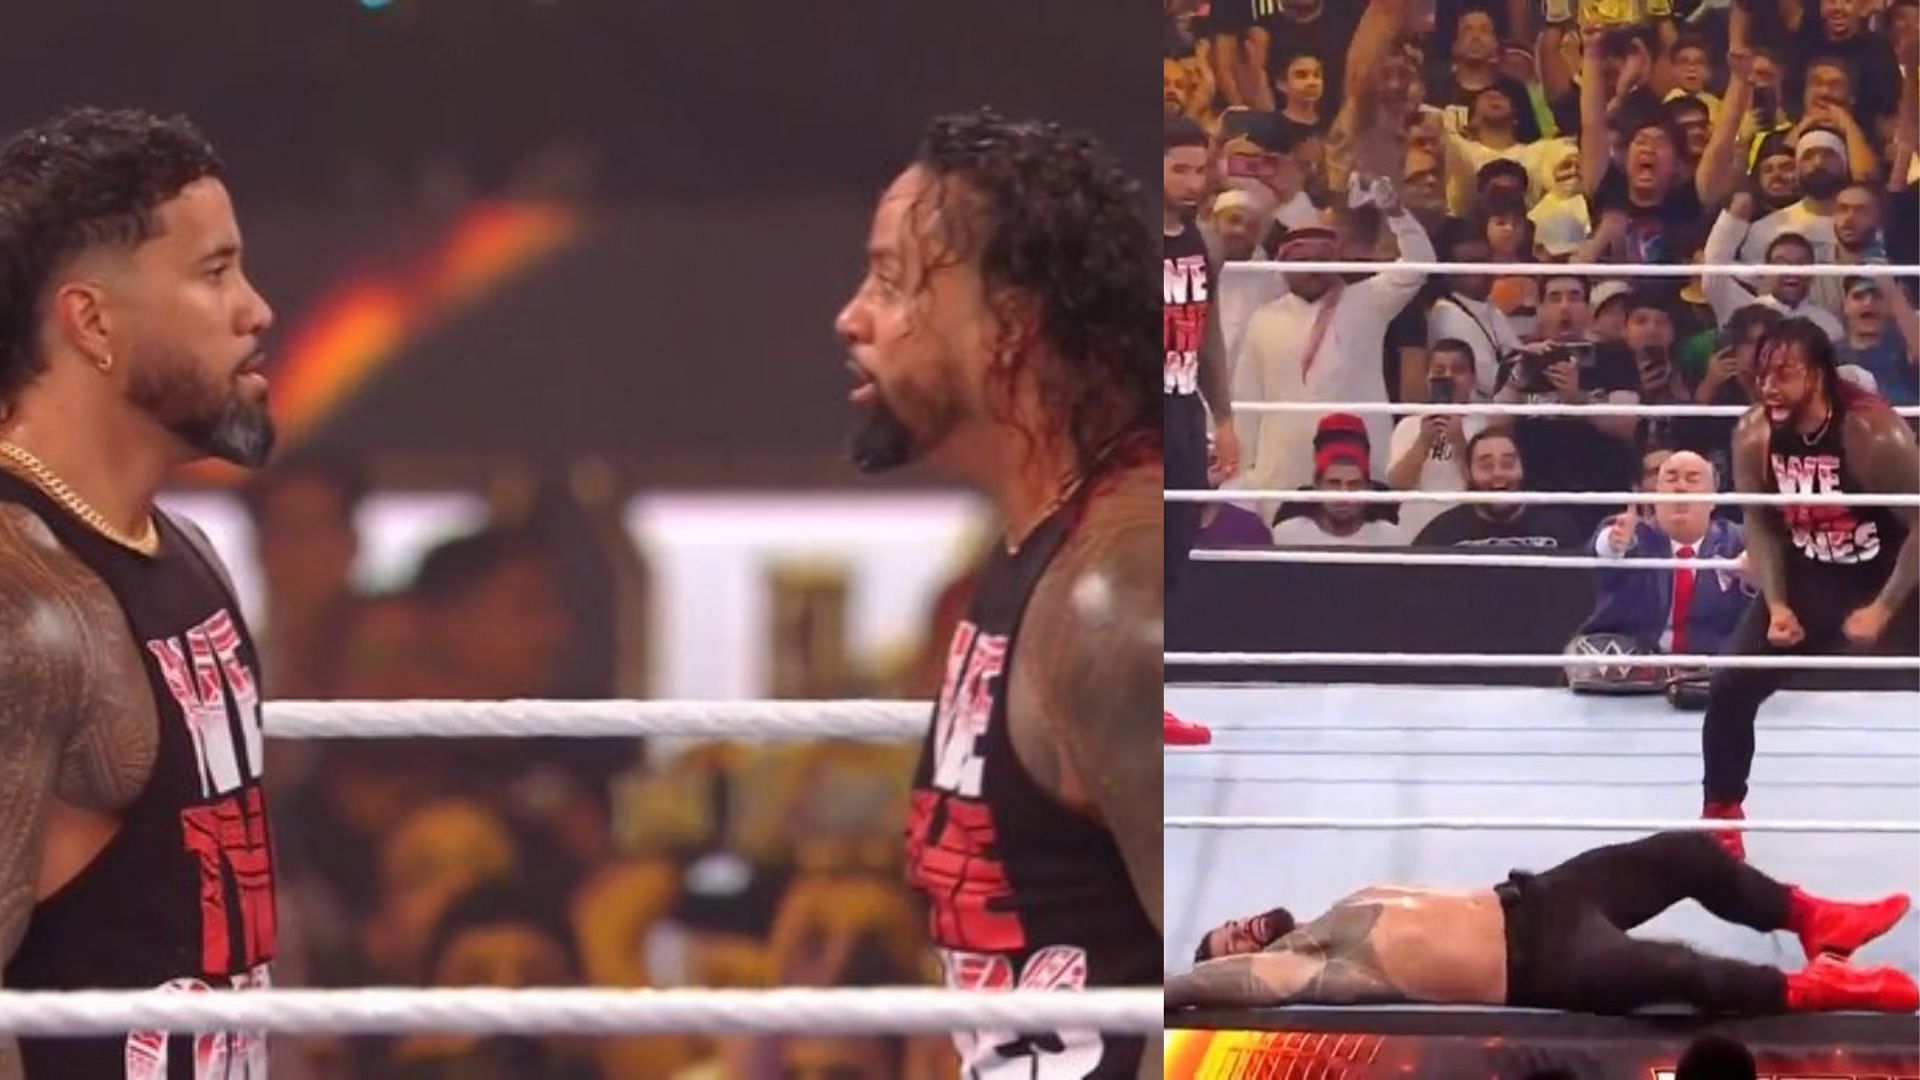 Jimmy Uso finally snapped and betrayed Roman Reigns